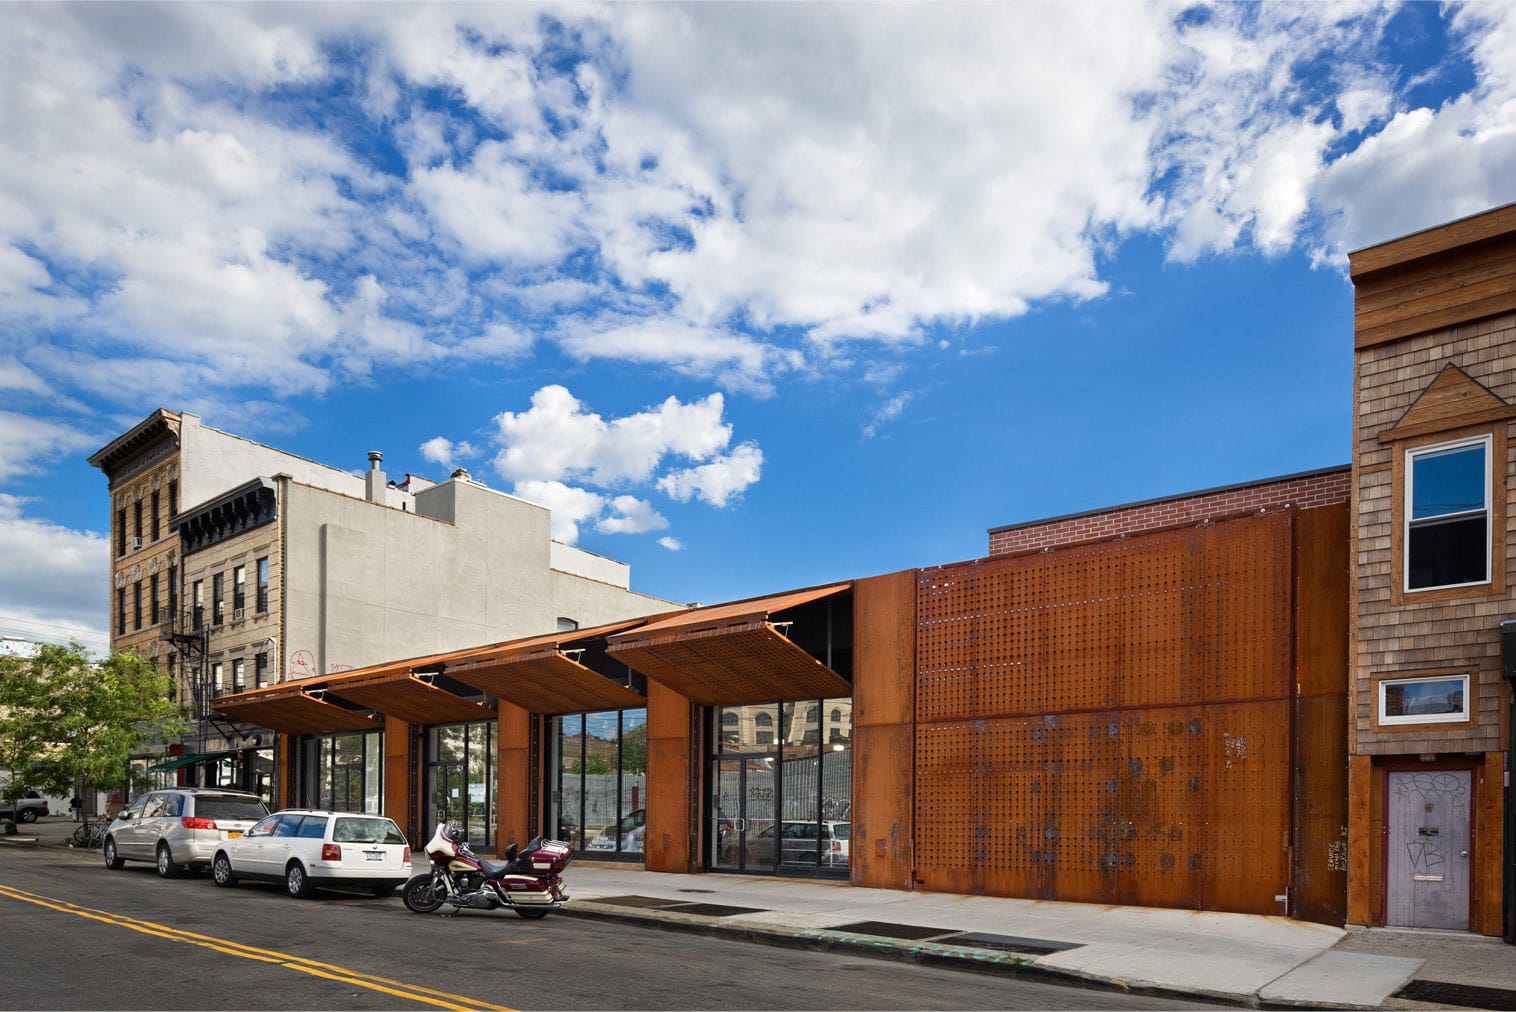 NYC warehouse get renovation including Schweiss Doors to create shopping center